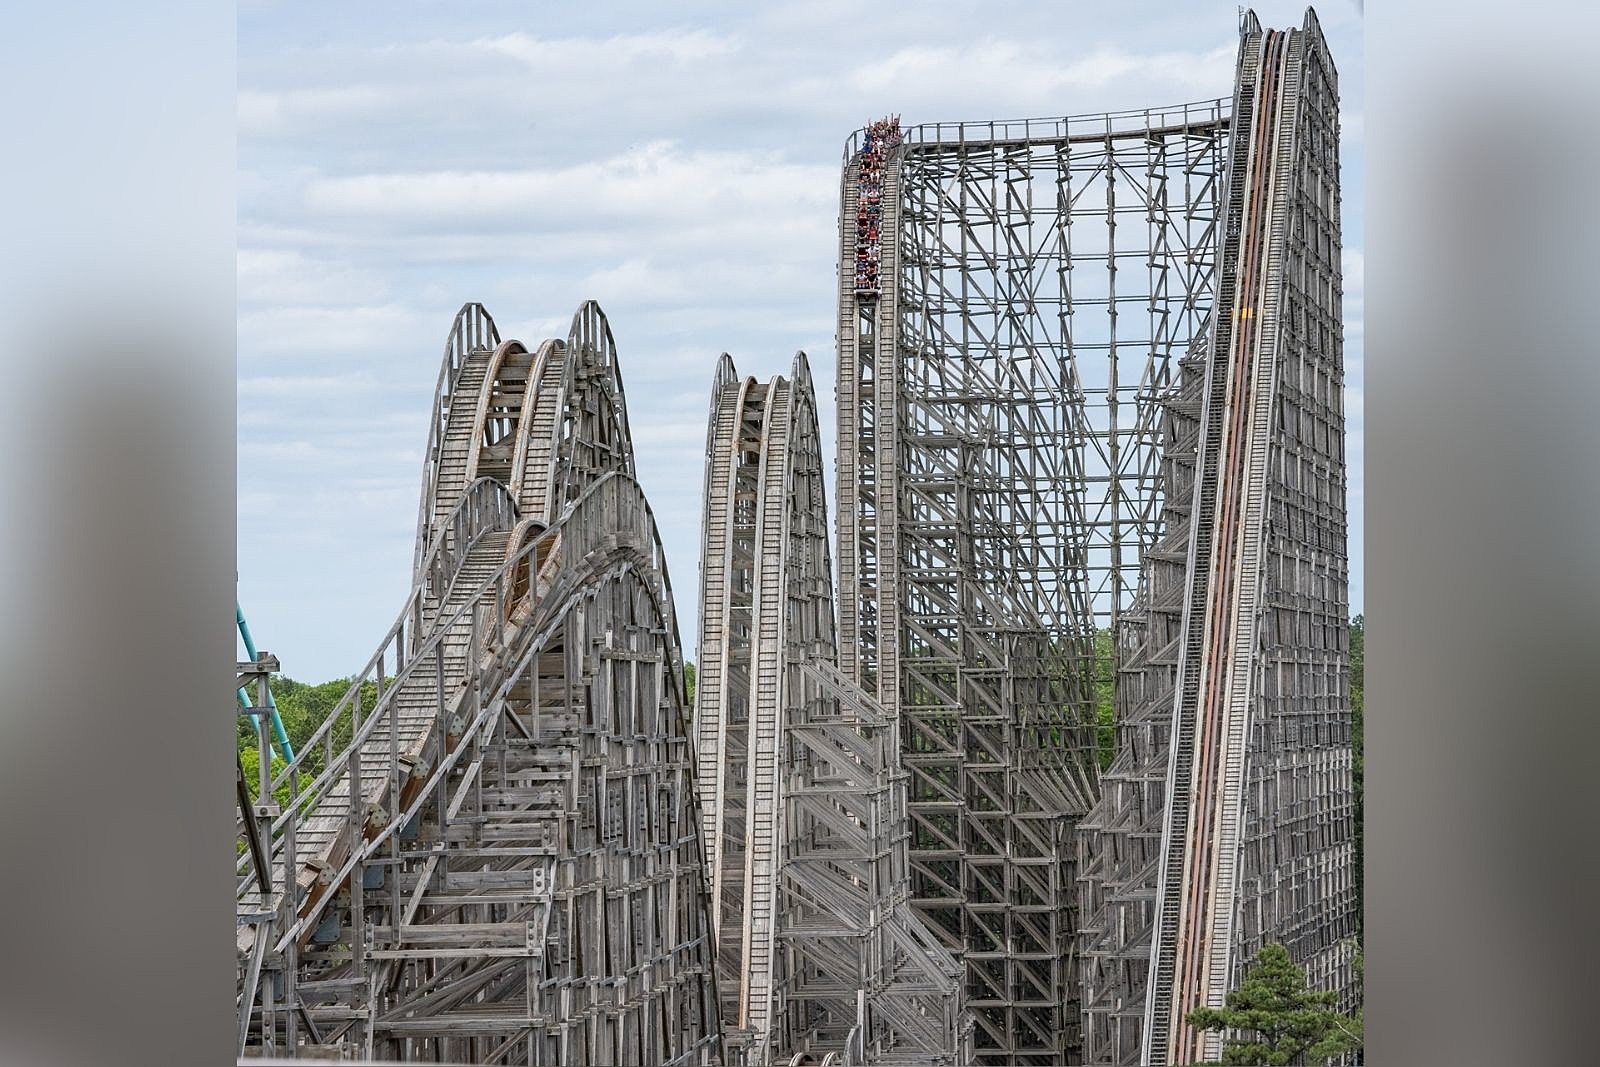 When Is El Toro Coaster At Great Adventure Re-Opening?